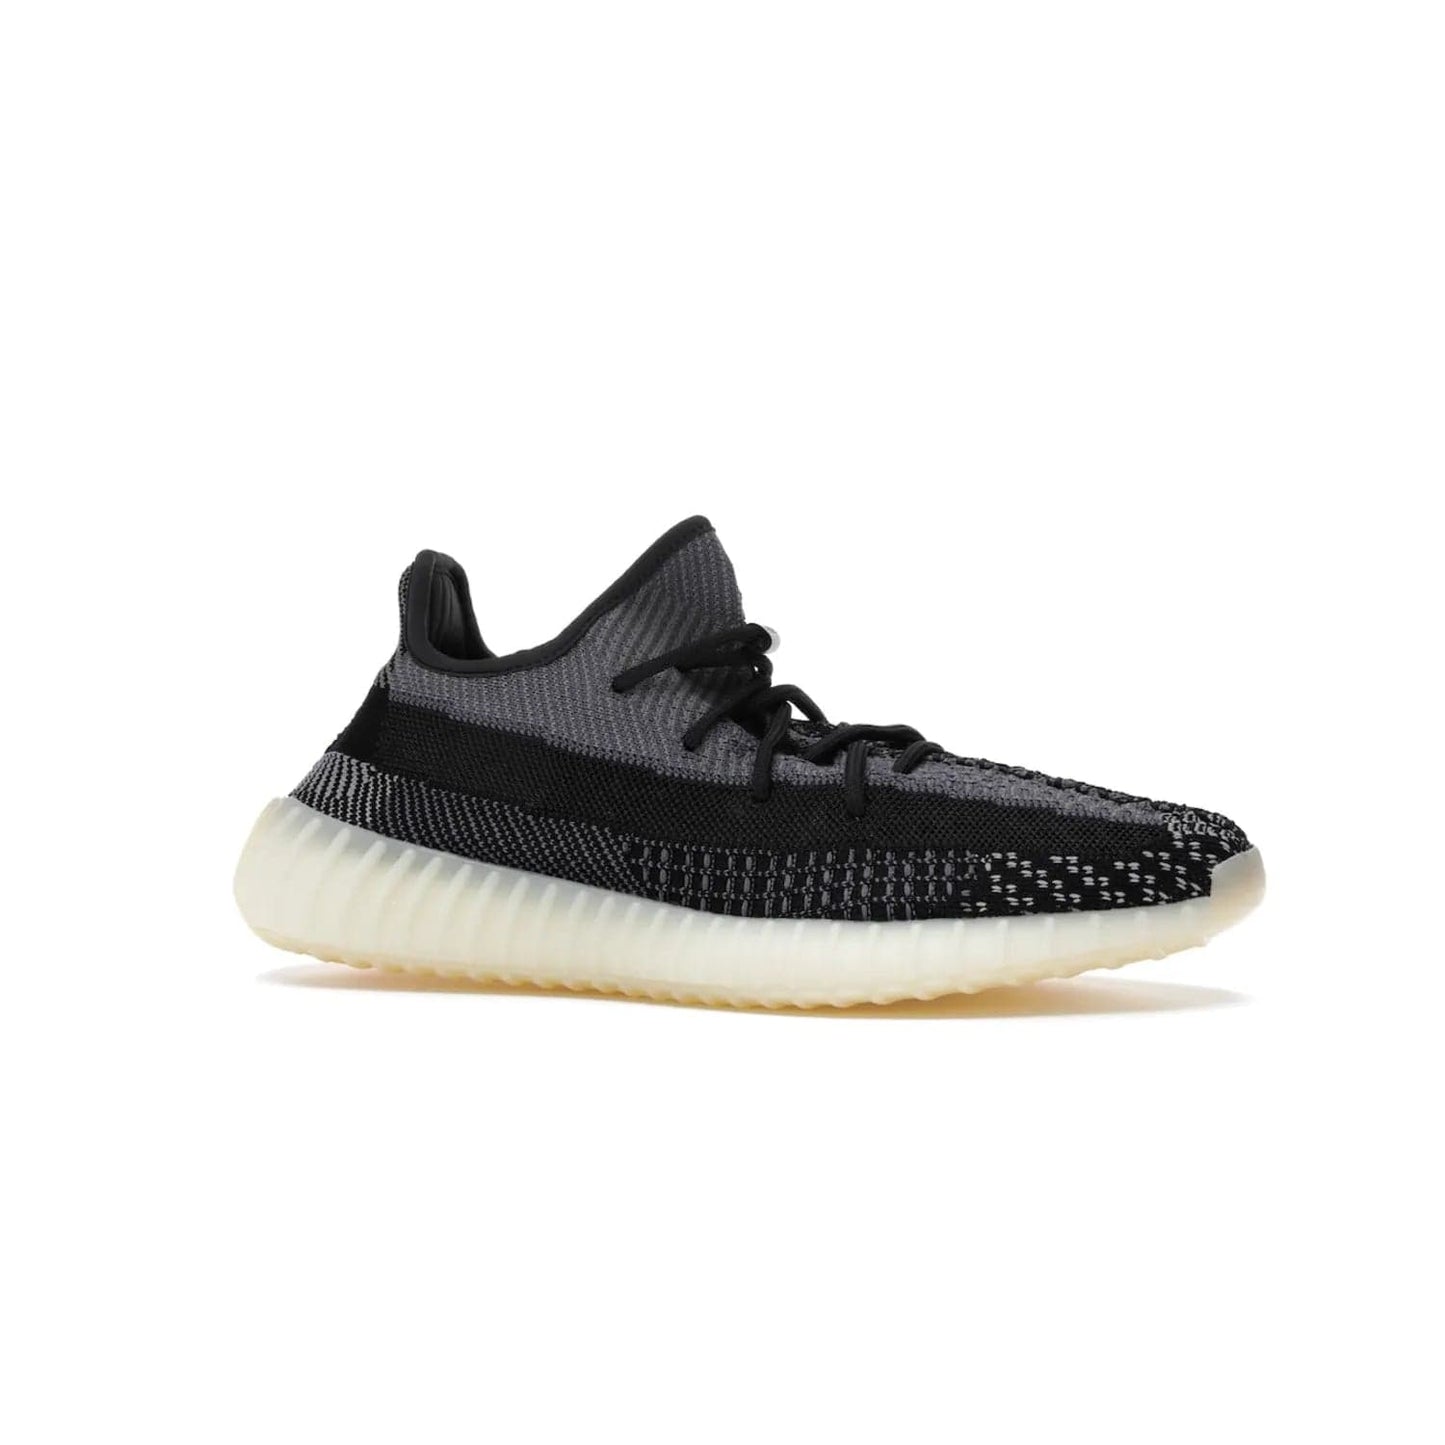 adidas Yeezy Boost 350 V2 Carbon - Image 3 - Only at www.BallersClubKickz.com - Introducing the adidas Yeezy Boost 350 V2 Carbon. Iconic sneaker with a dark-hued upper, breathable Primeknit mesh, signature side stripe, off-white midsole & BOOST cushioning. Perfect for any sneaker lover. Released October 2020.